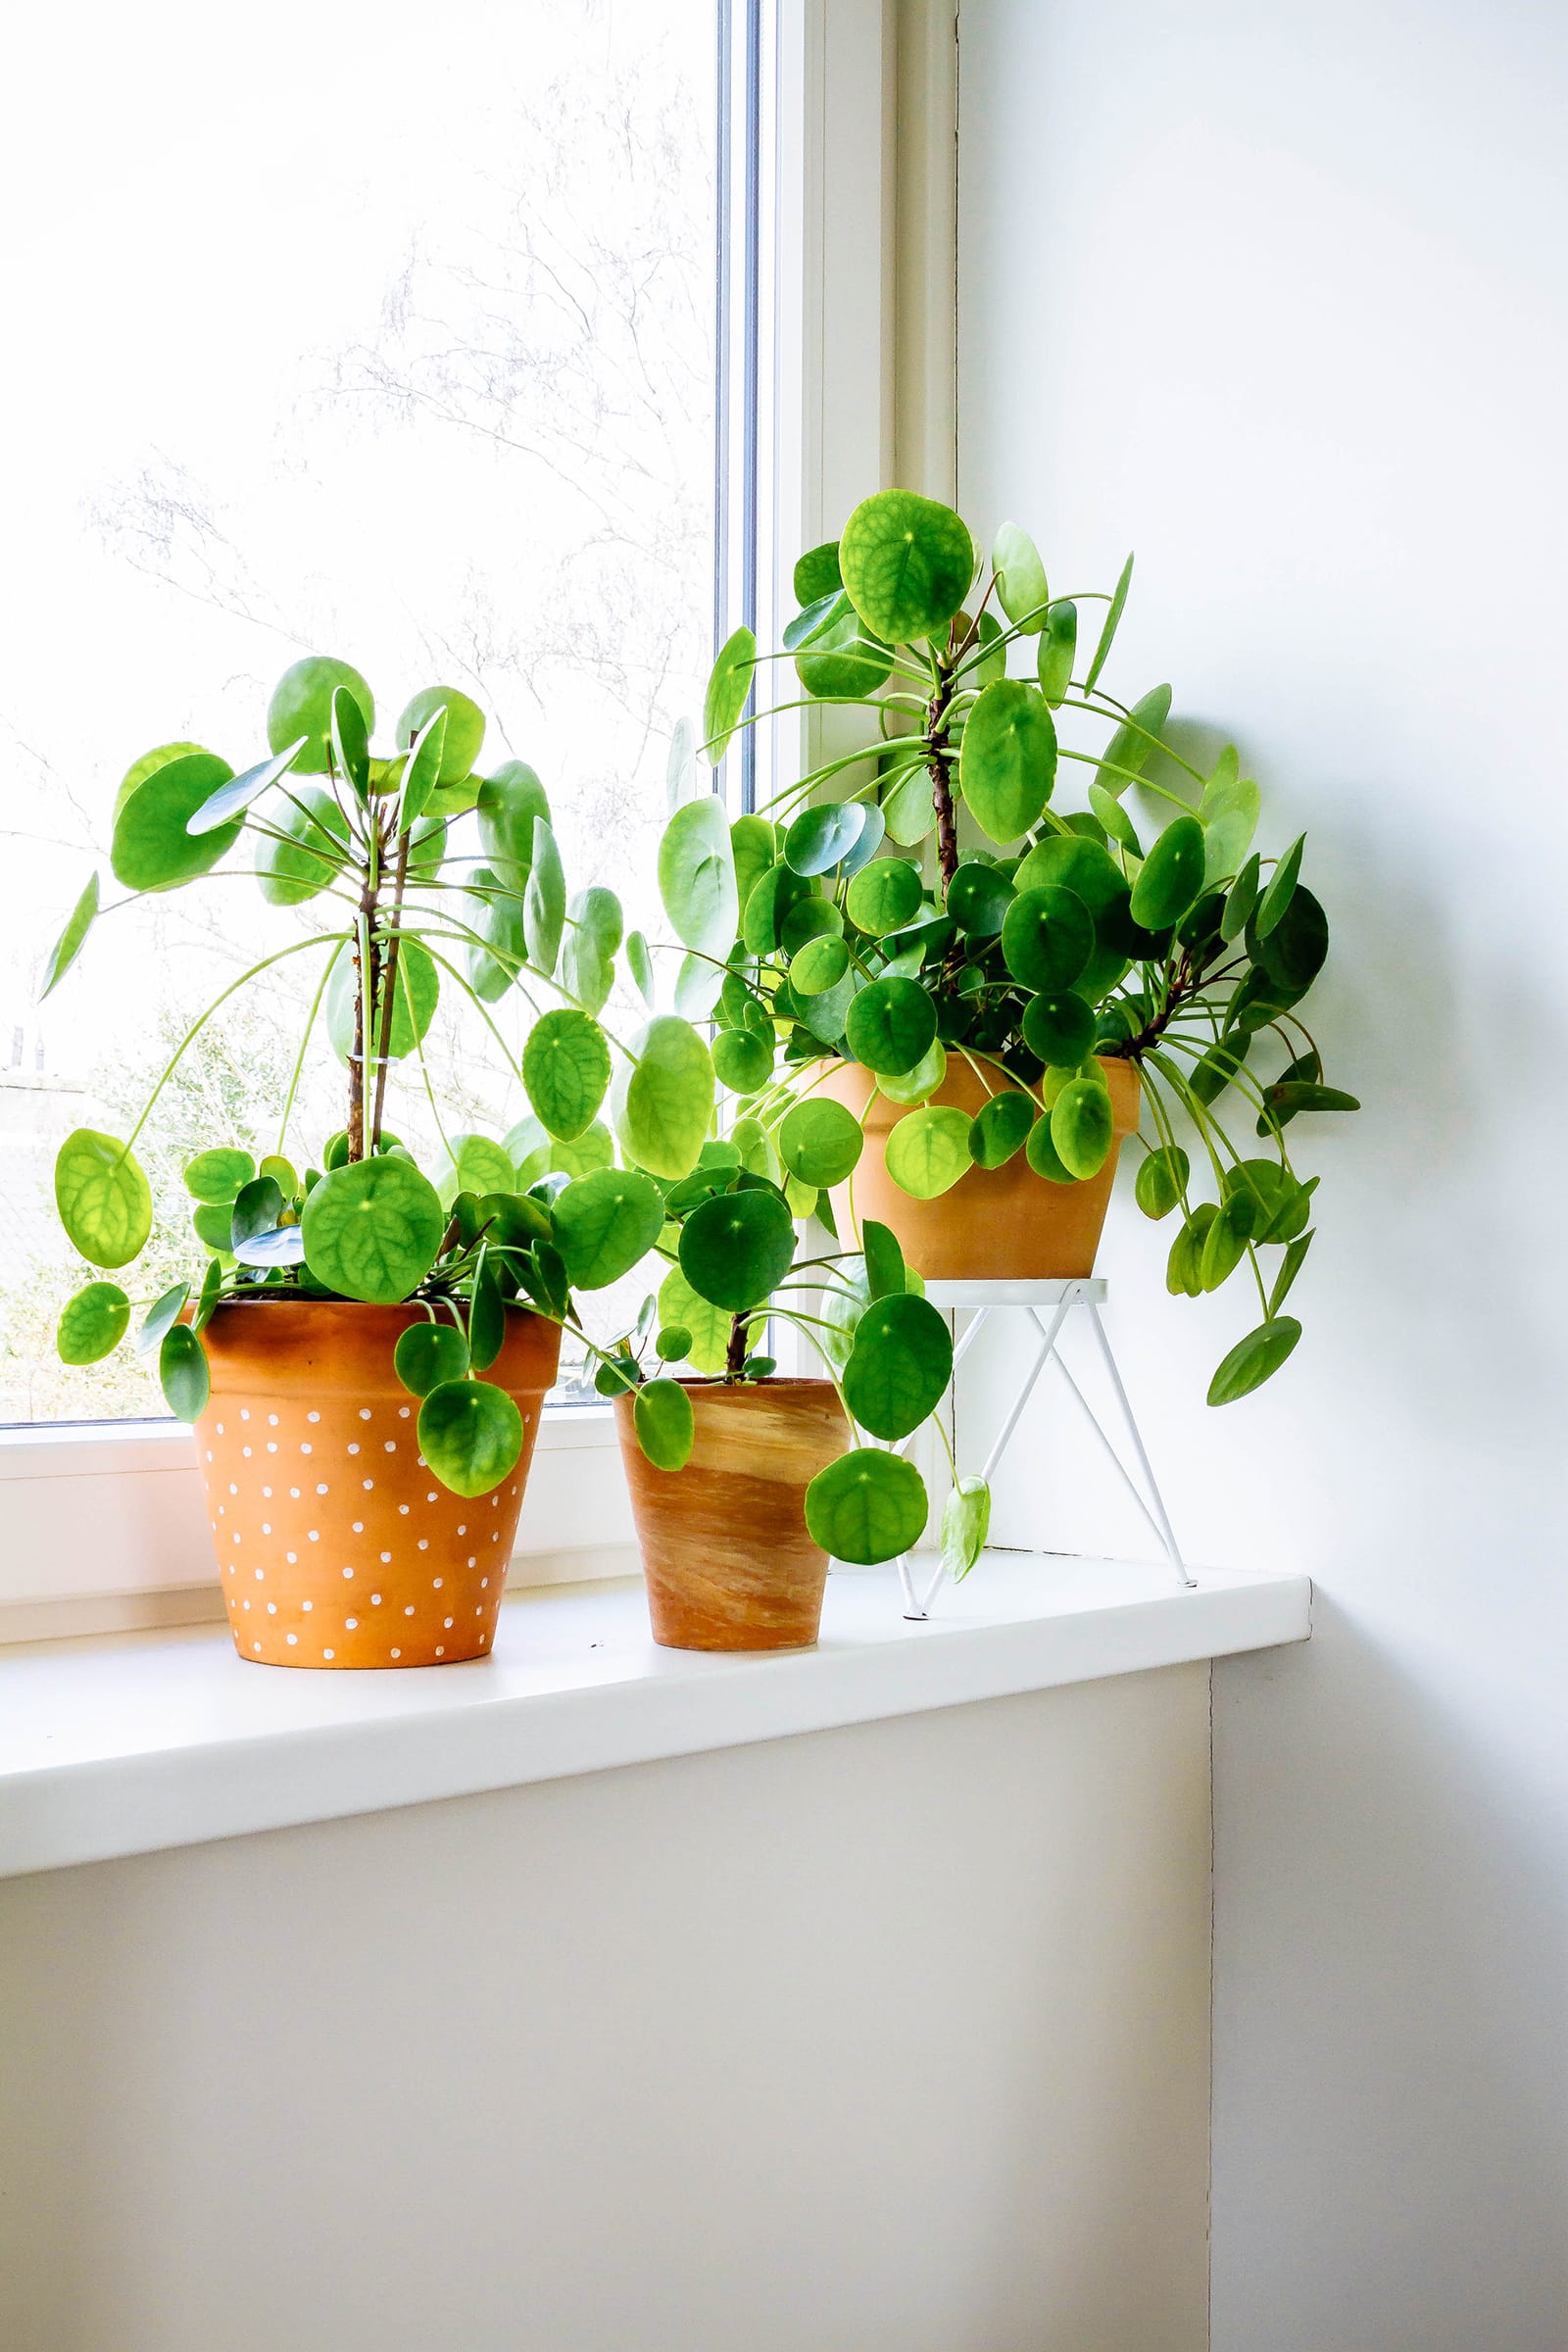 Beginner's guide to caring for Chinese money plant (Pilea peperomioides)